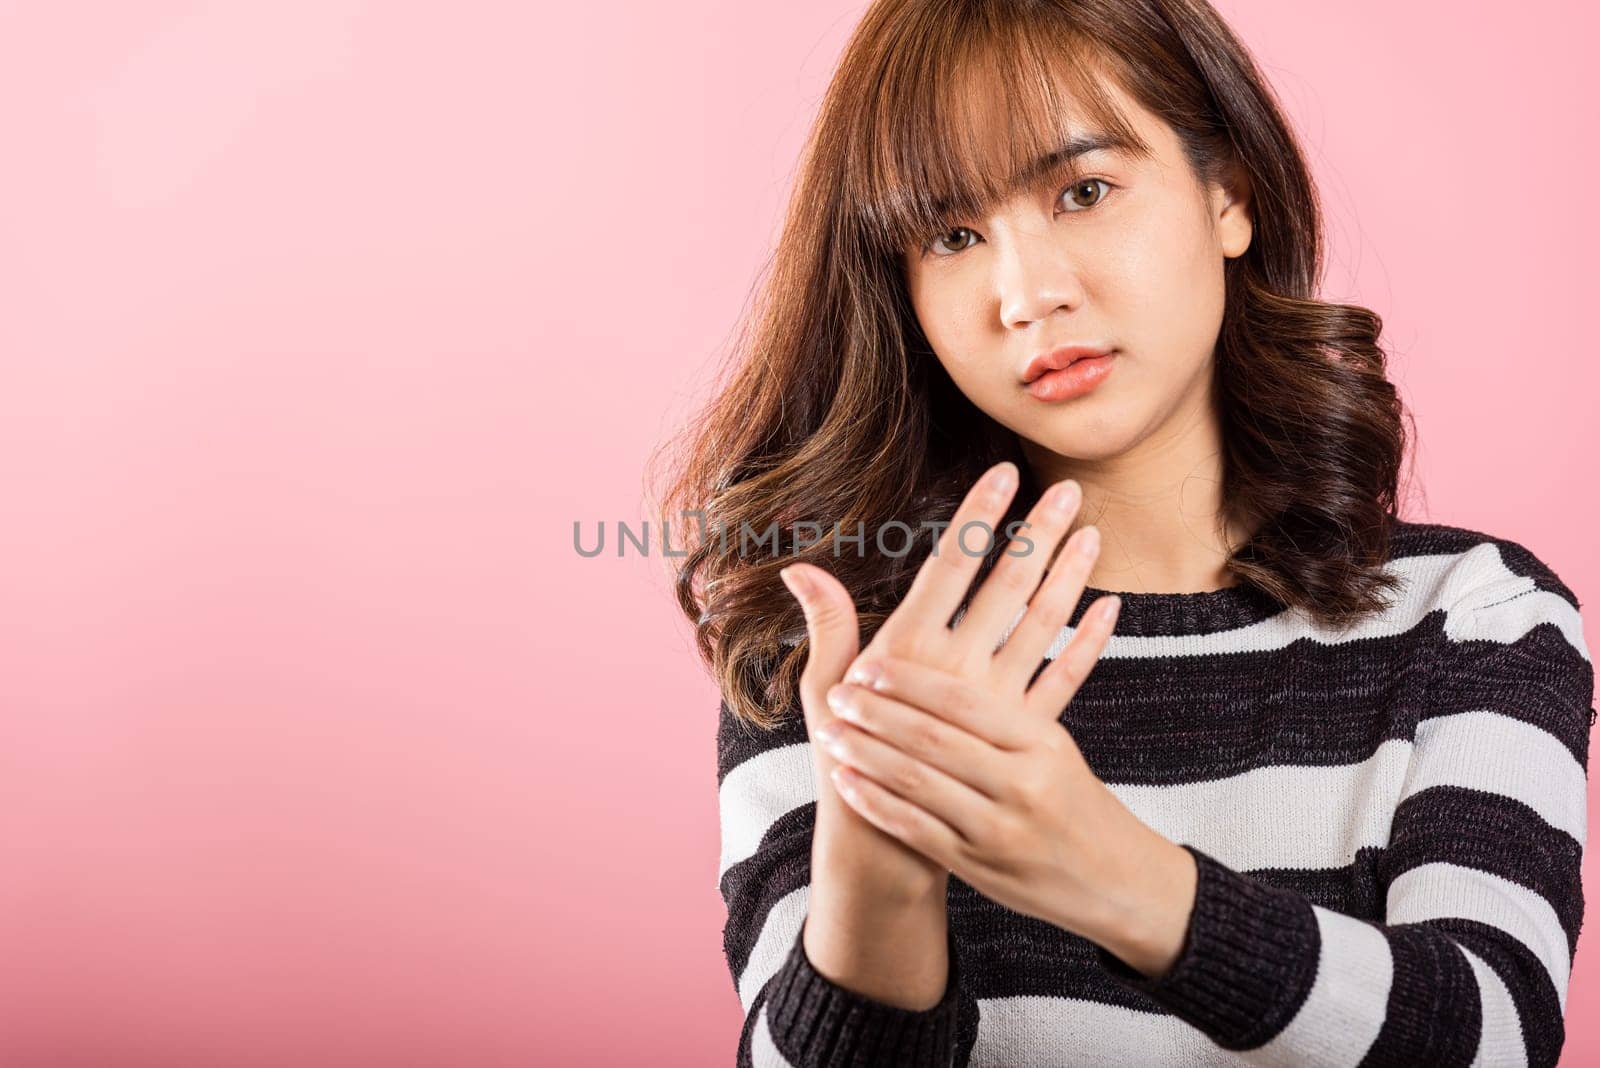 Portrait of Asian beautiful young woman suffering from pain in palm or hands and massaging her painful hands, studio shot isolated on pink background, Health care arthritis concept, Wrist pain